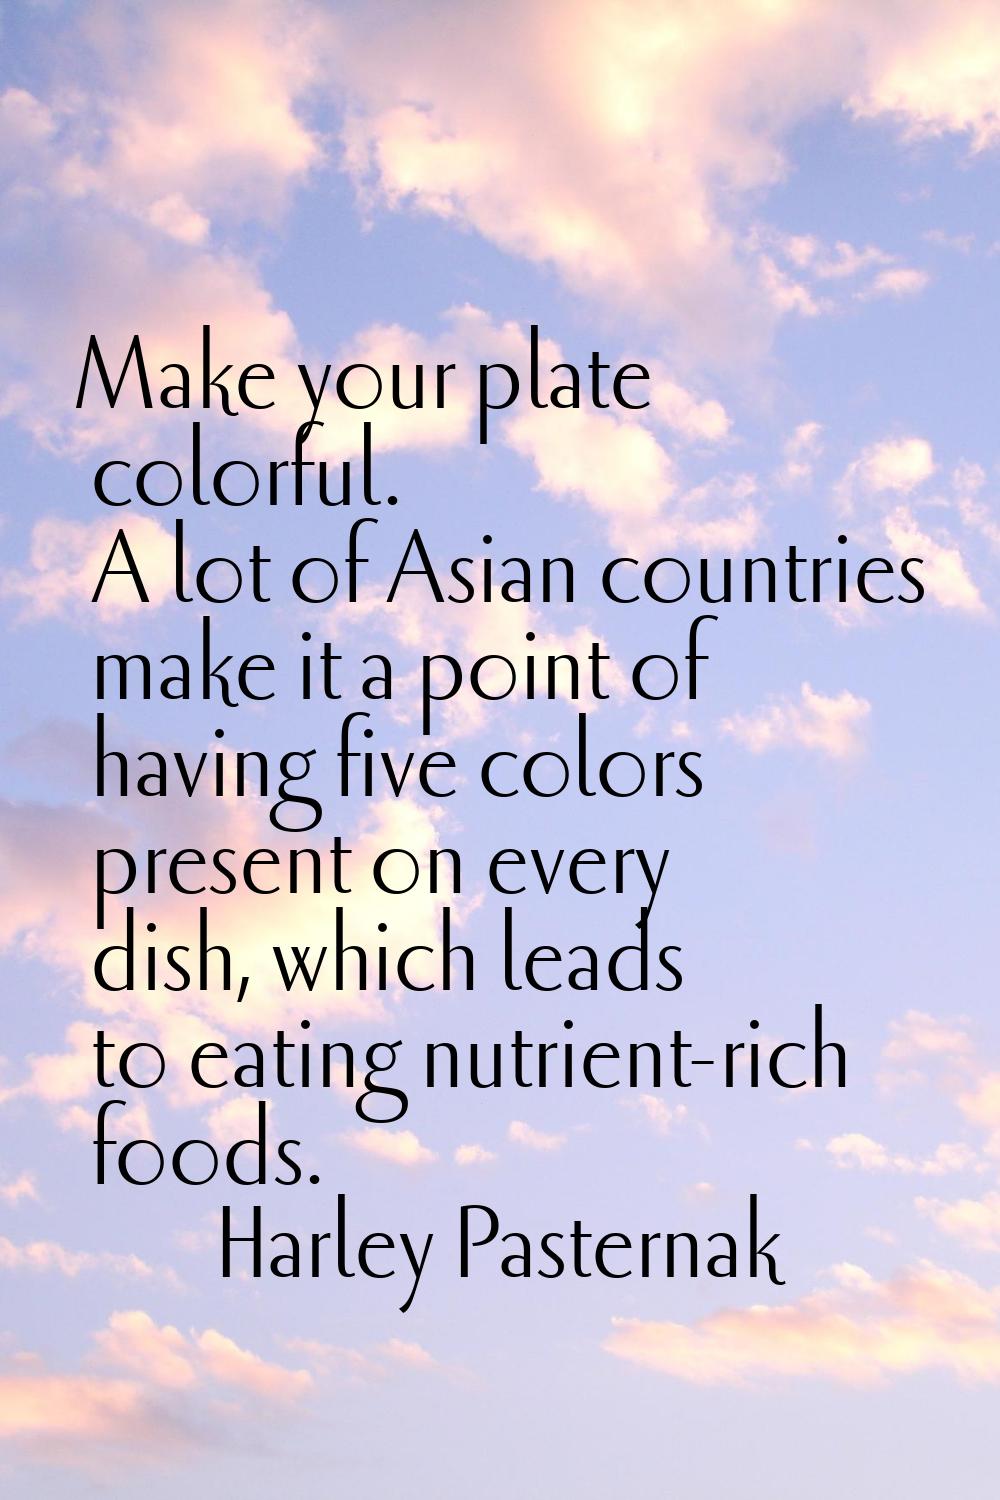 Make your plate colorful. A lot of Asian countries make it a point of having five colors present on